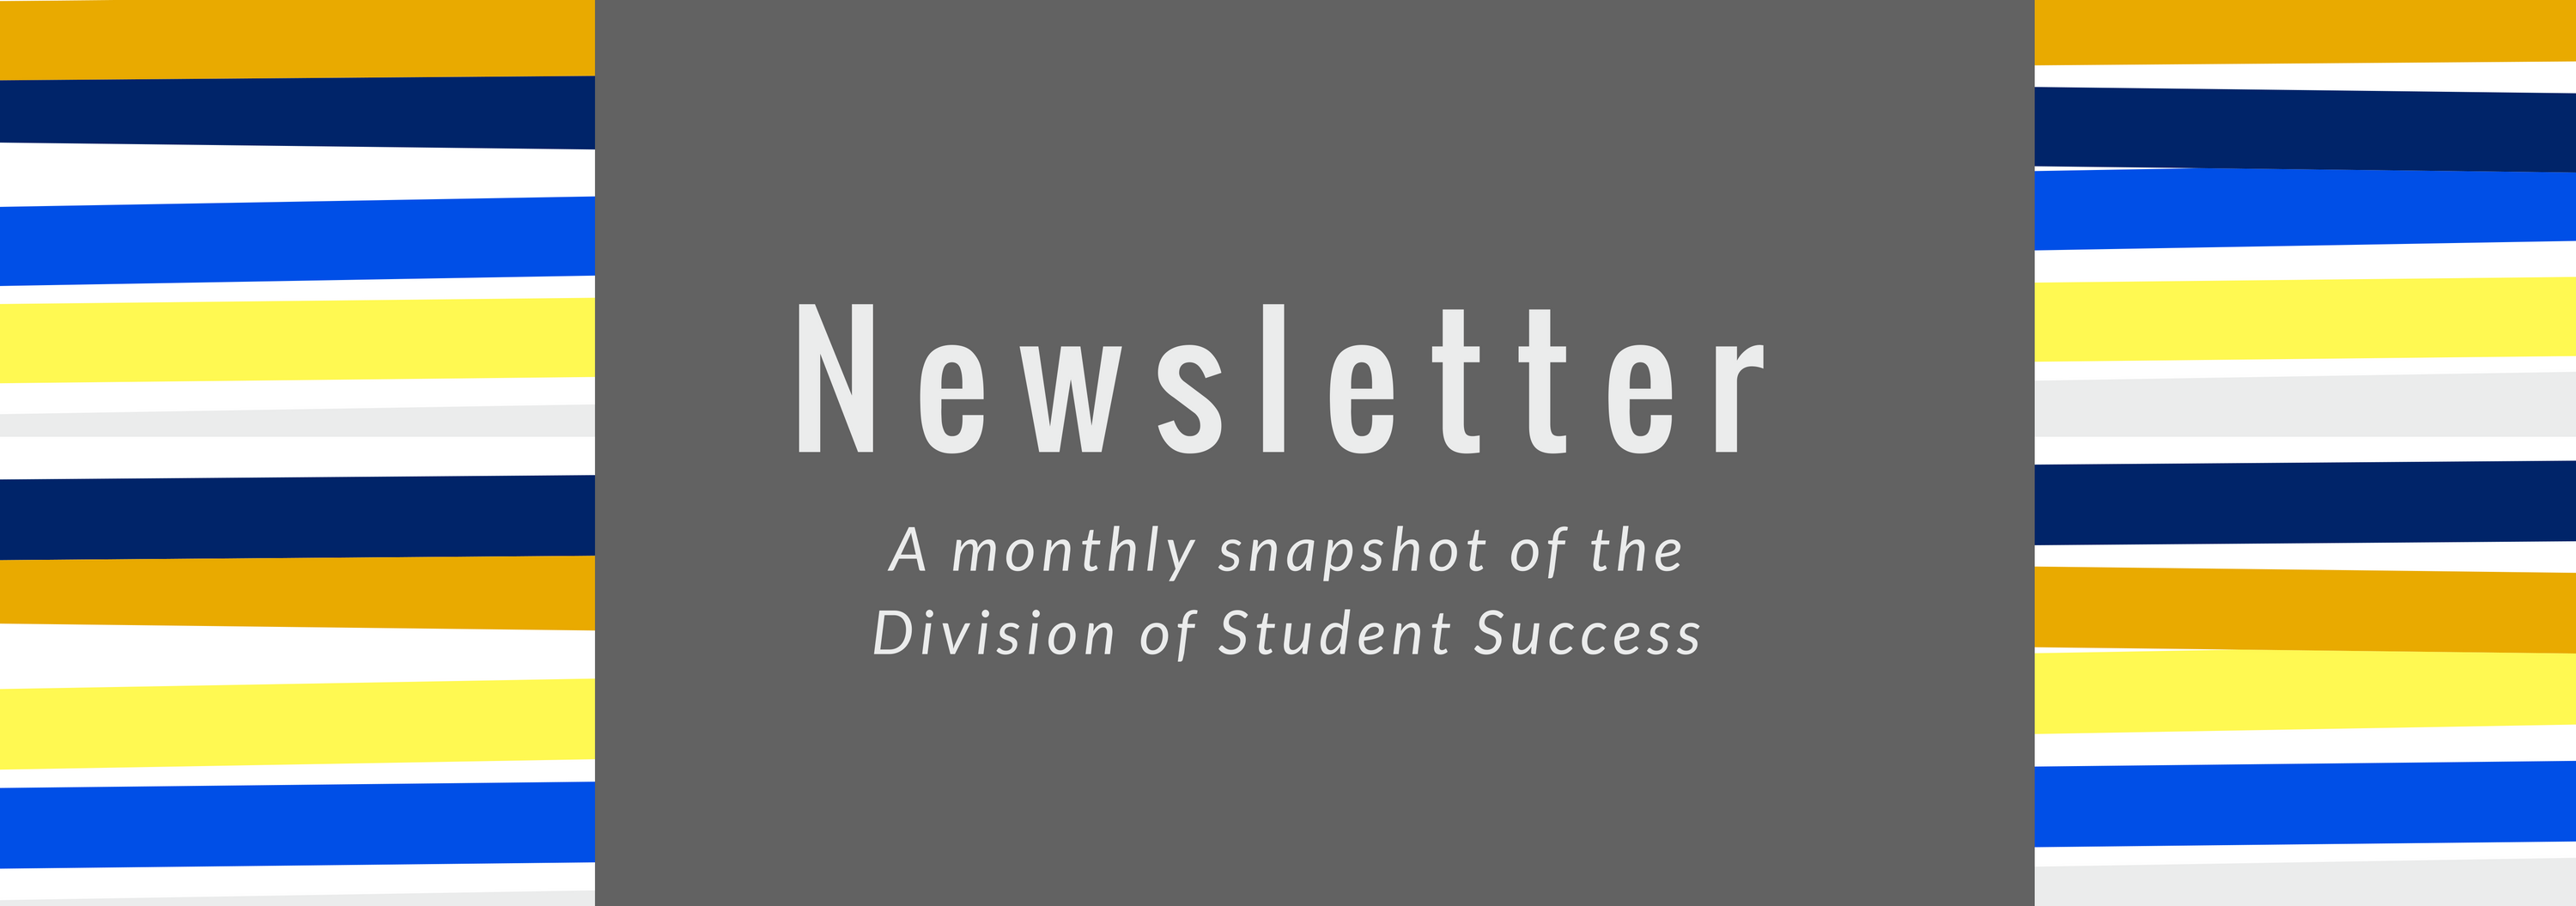 newsletter banner a monthly snapshot of the Division of Student Success